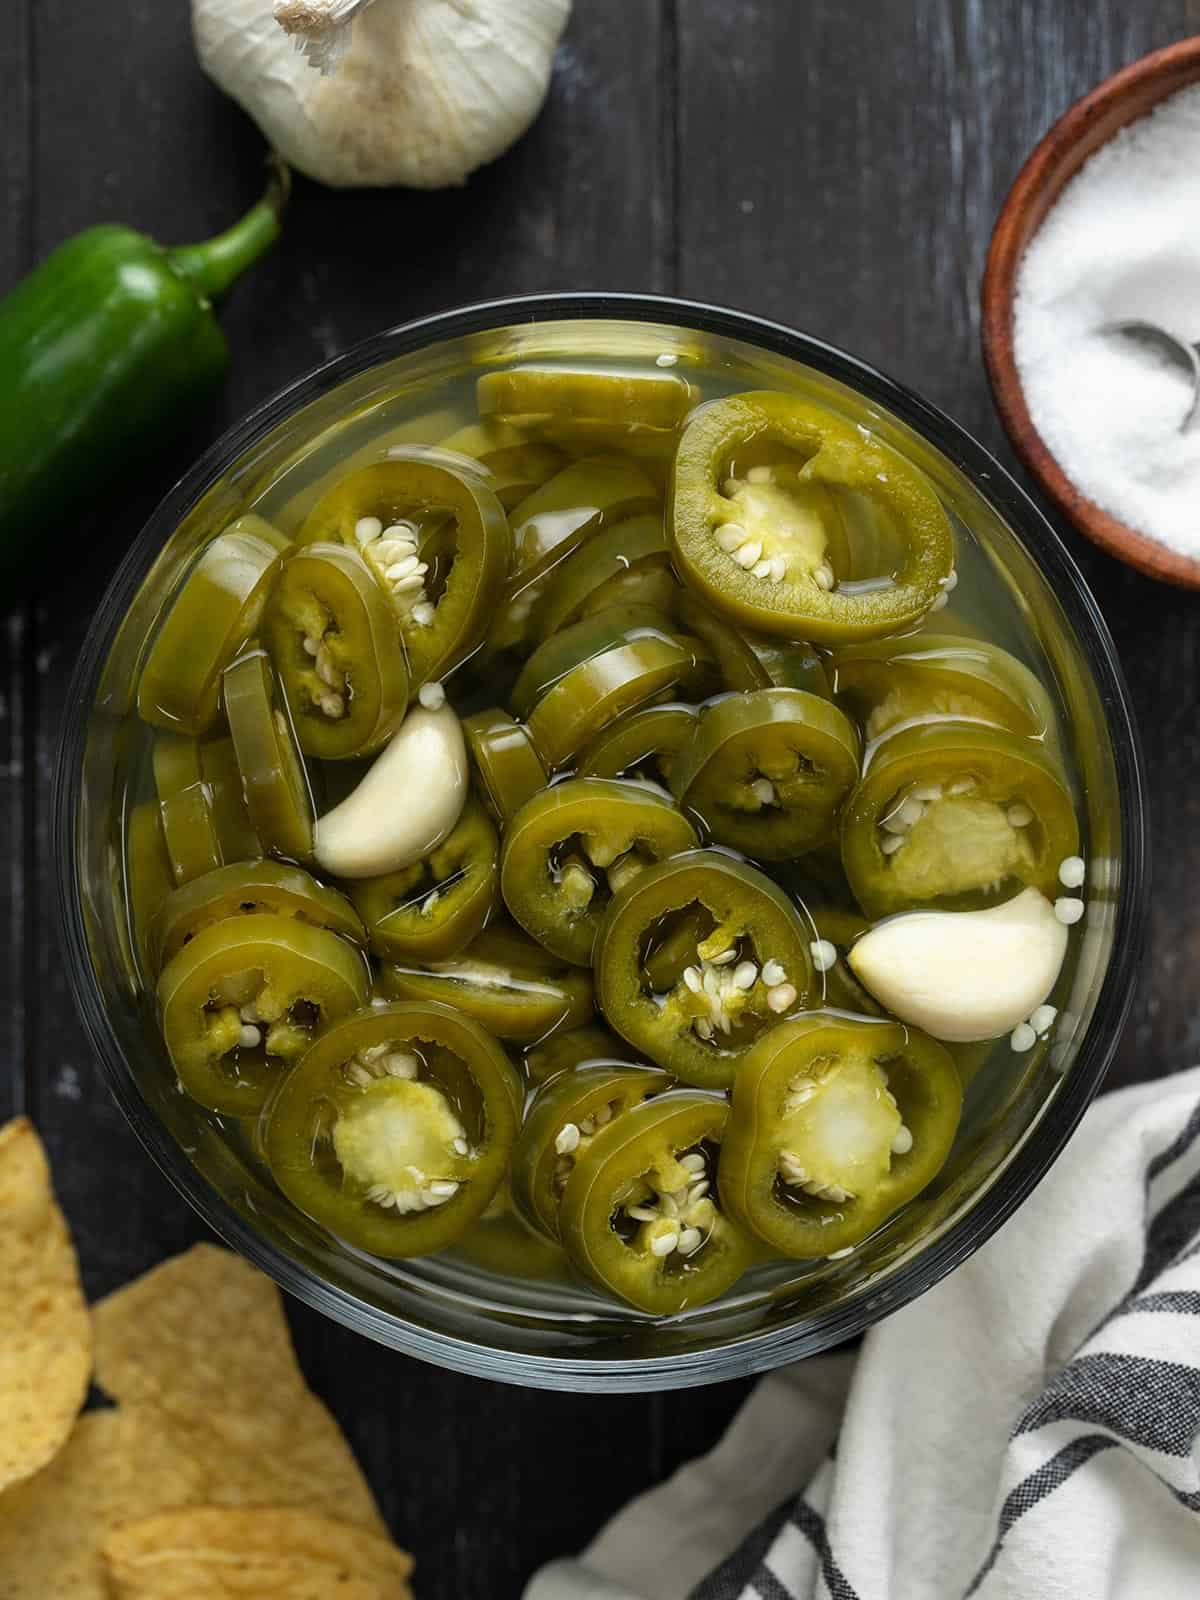 Overhead view of a bowl full of pickled jalapeños.